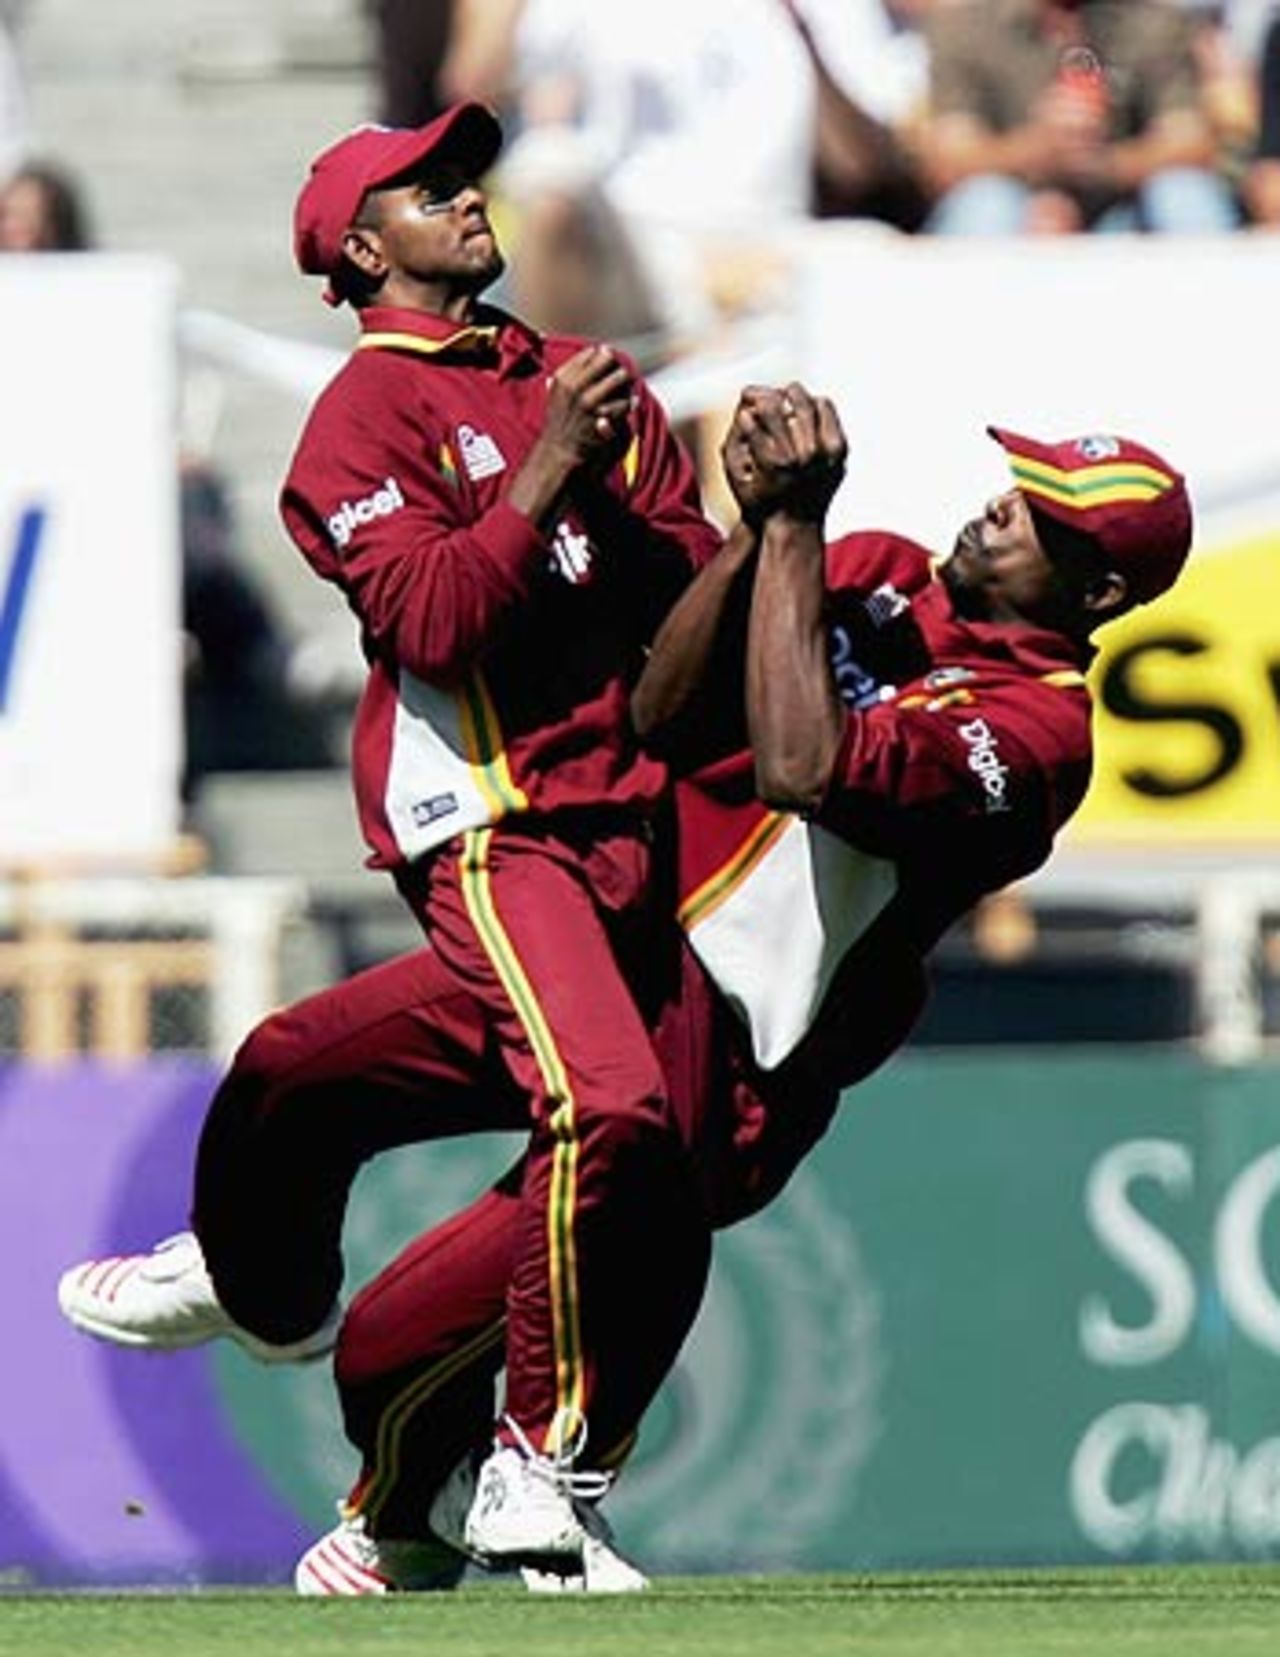 Runako Morton grabs on to the catch avoiding a collision with Shivnarine Chanderpaul, New Zealand v West Indies, 3rd ODI, Christchurch, February 25 2006